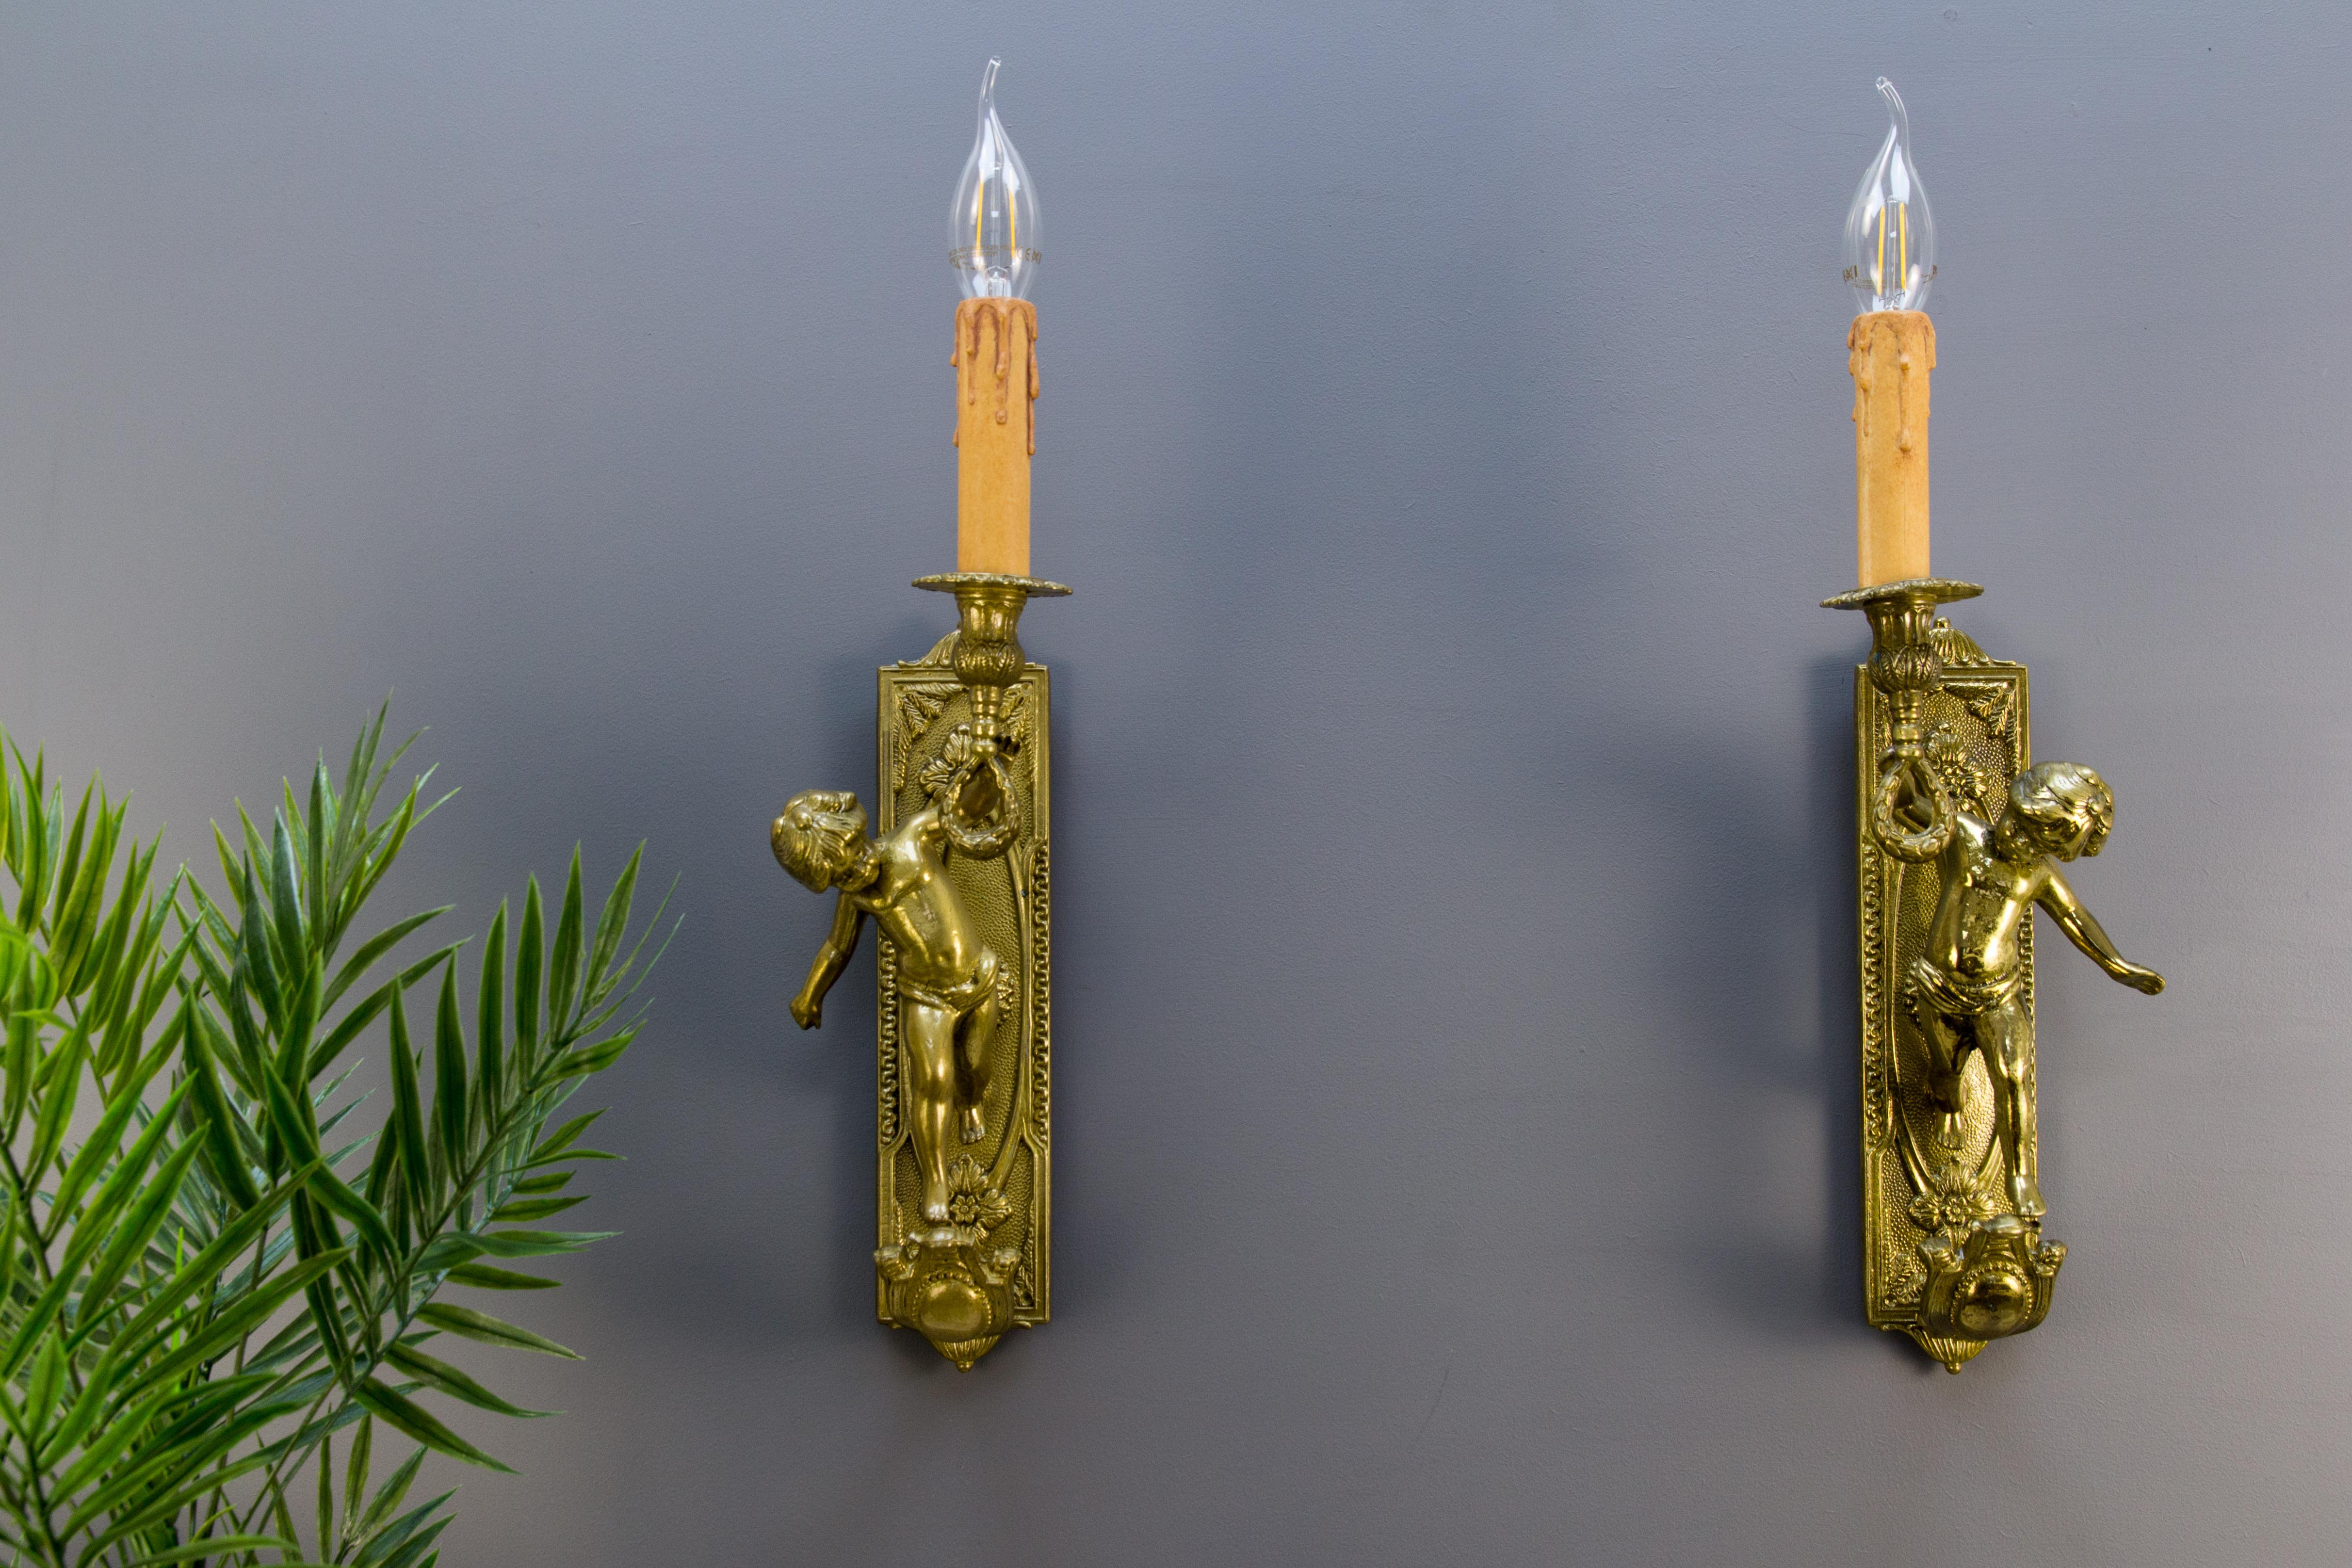 Pair of beautiful Italian electrified wall sconces, originally candlesticks made of brass and bronze in the 1950s. The wall panels are accented with neoclassical motifs on a textured surface. Cherub or Putti figure is holding up a torch that has a